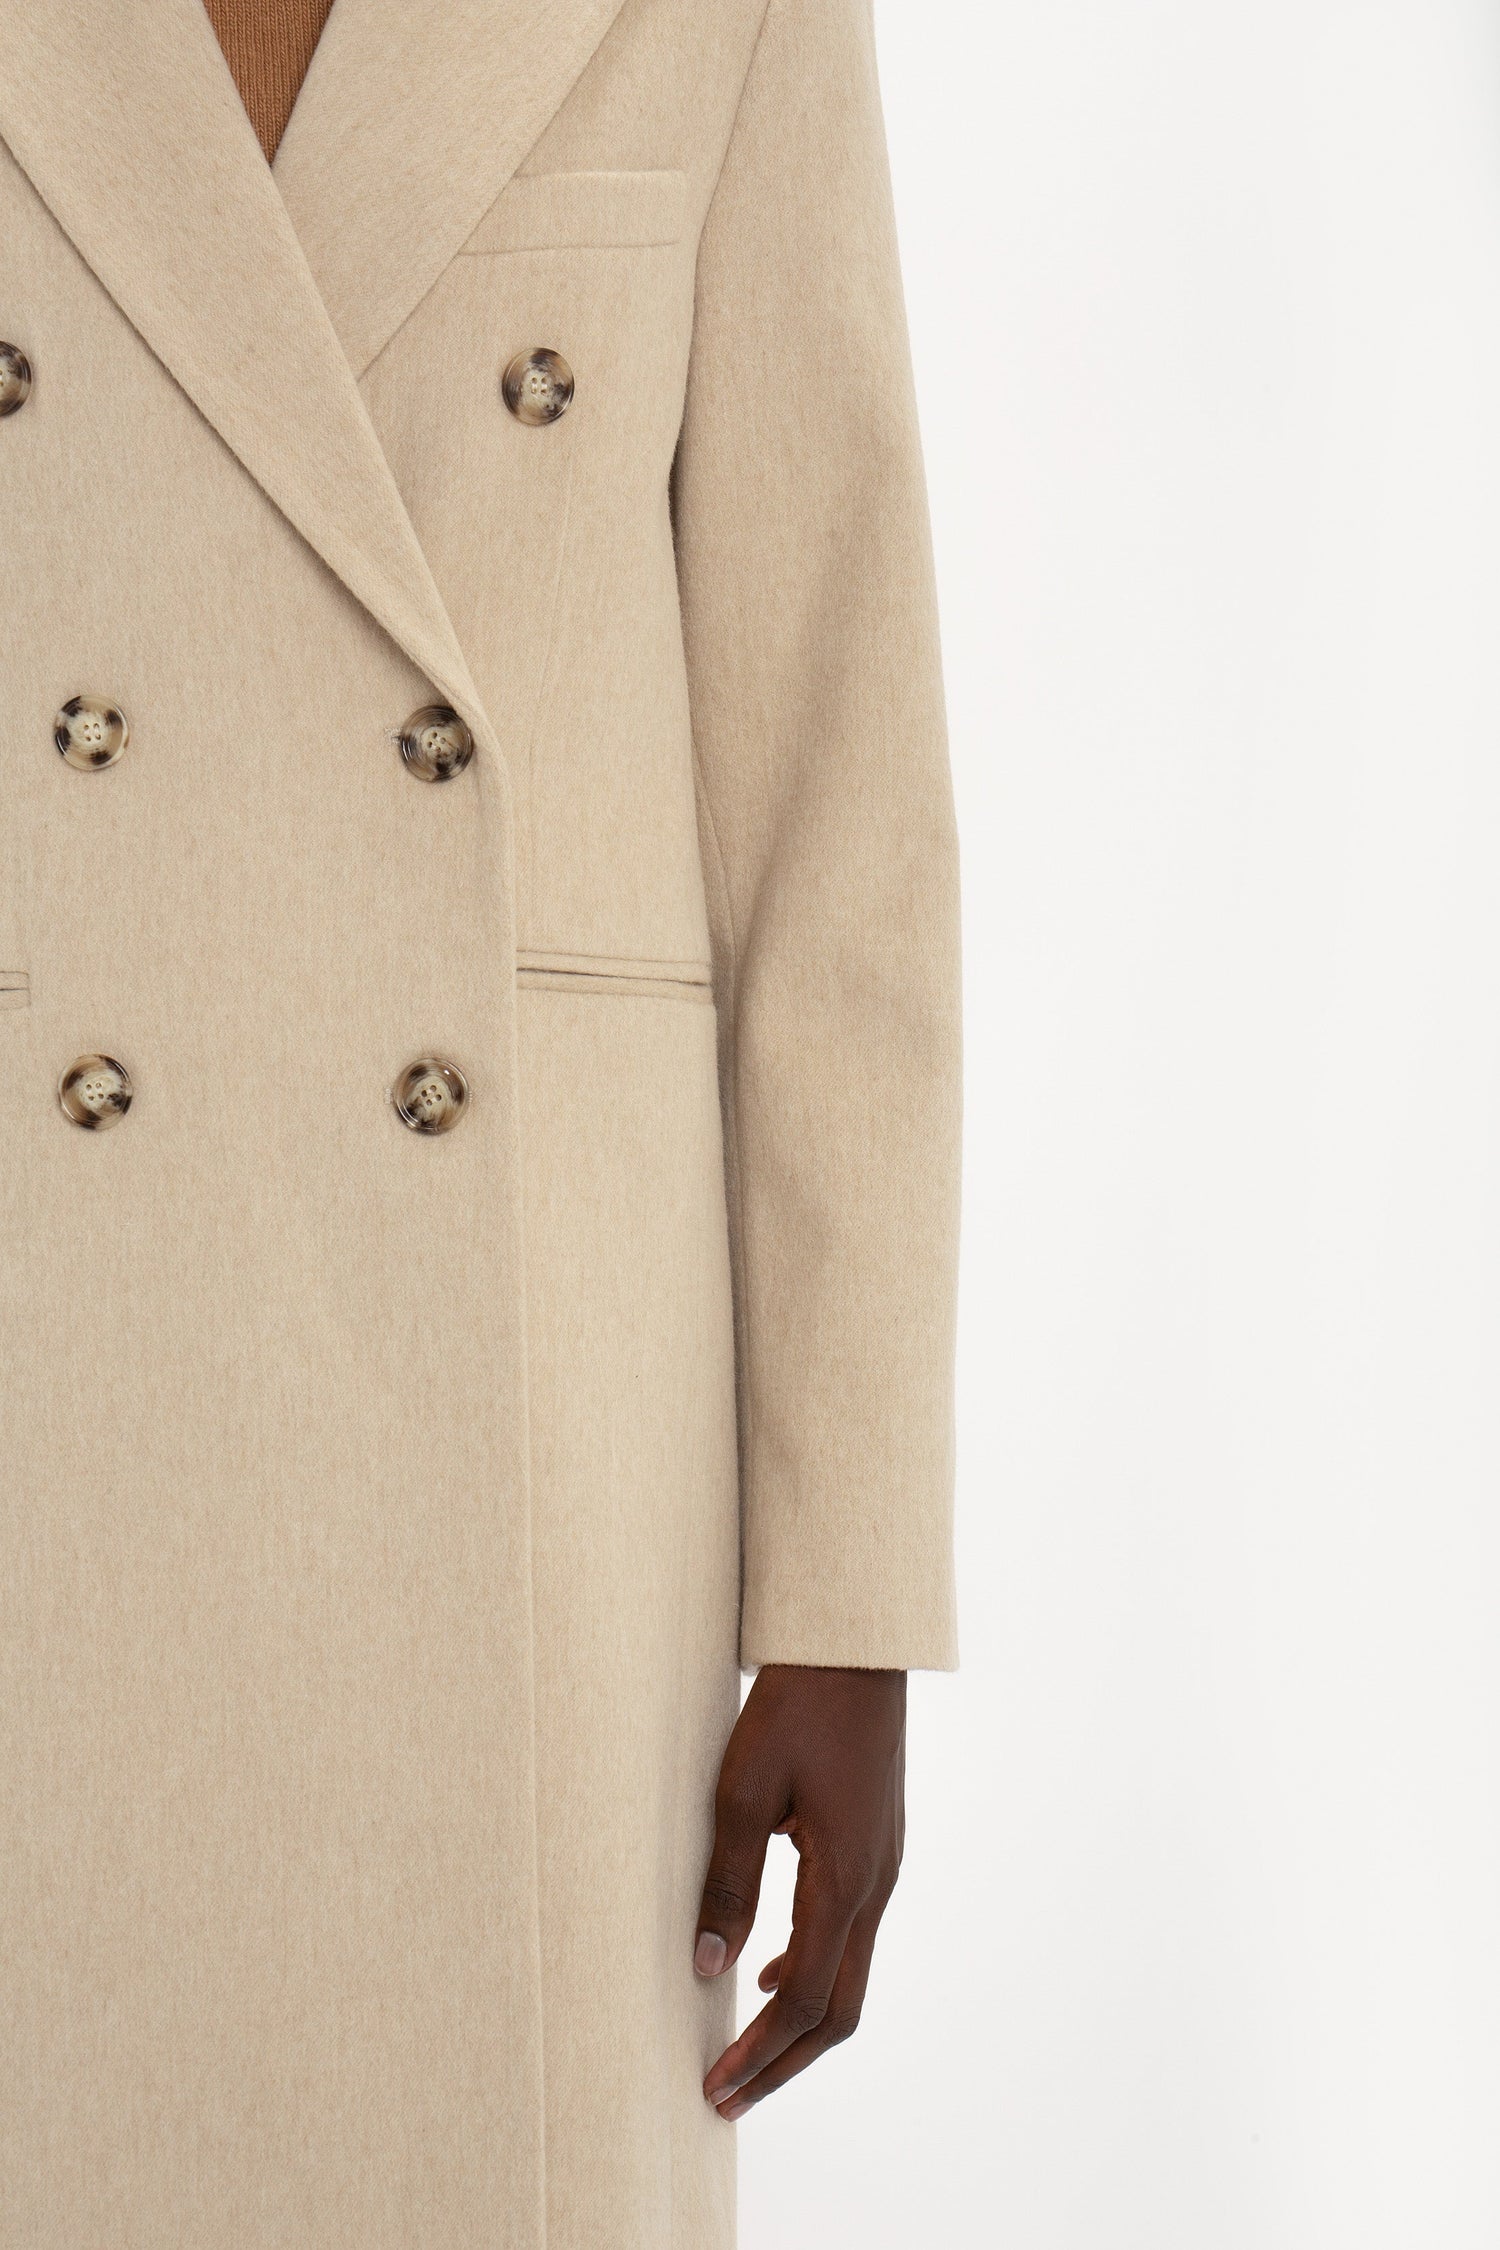 Close-up of a person wearing a Victoria Beckham Tailored Slim Coat In Bone, focusing on the coat's texture and buttons with a visible hand detail.